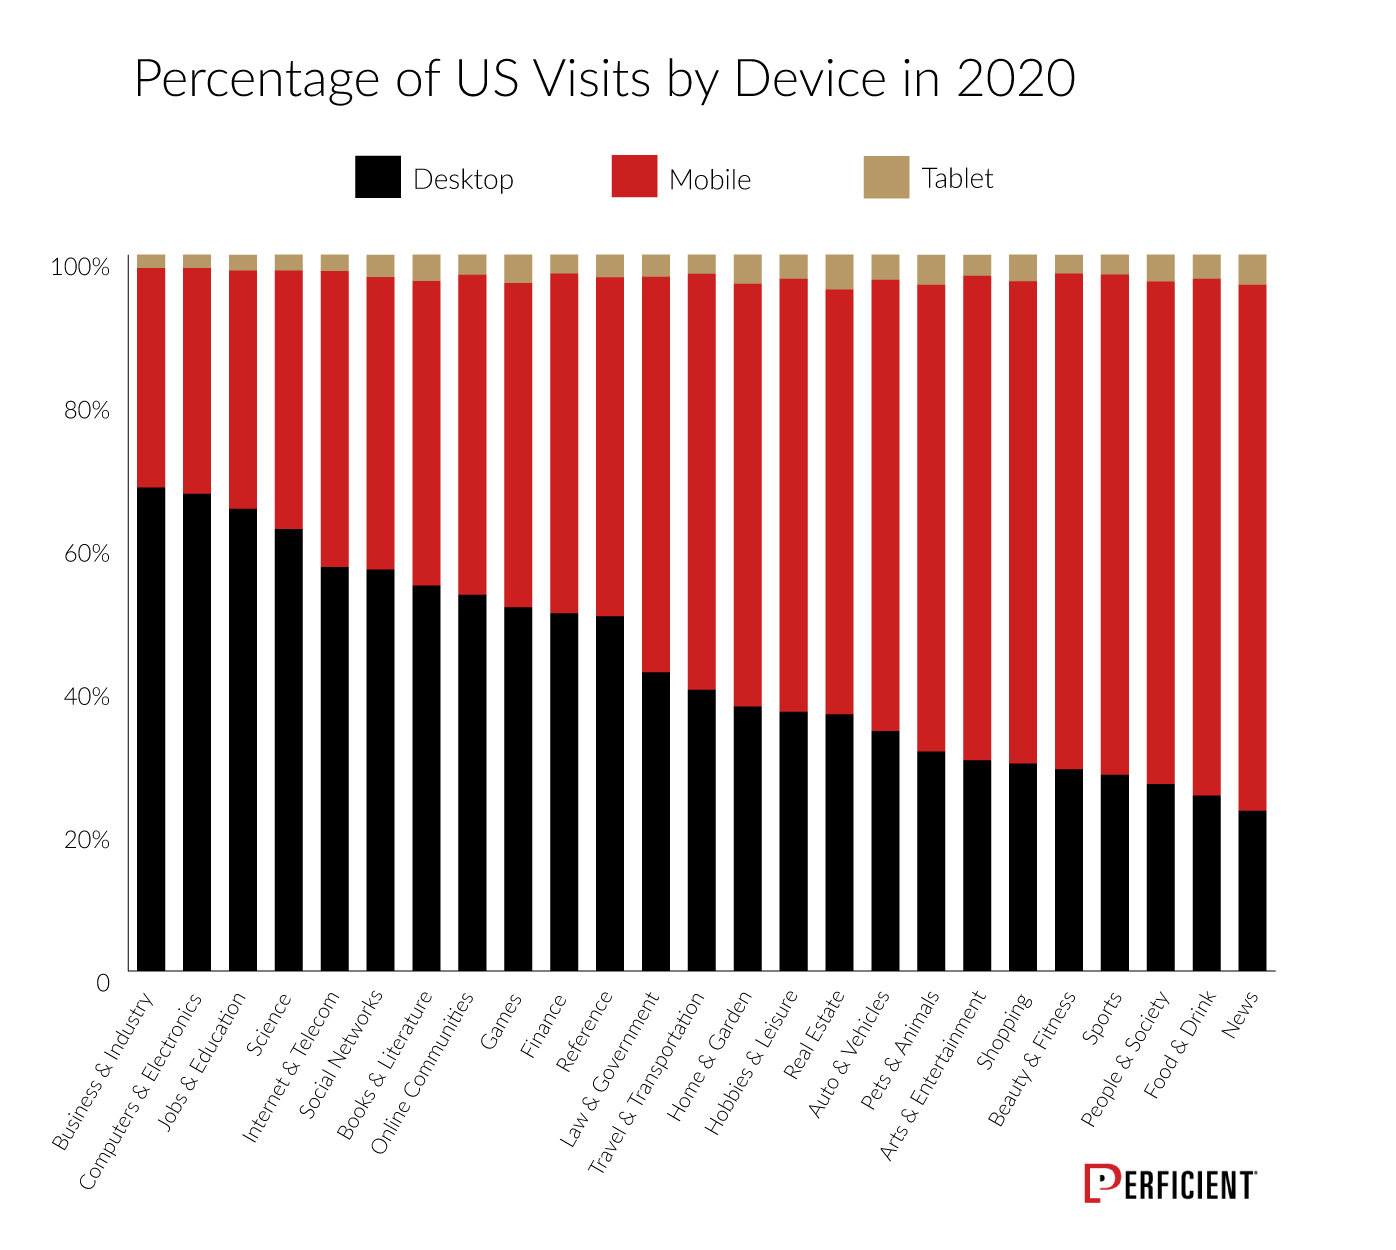 Global Visits In Percentage By Industry for Desktop, Mobile, and Tablet In 2020